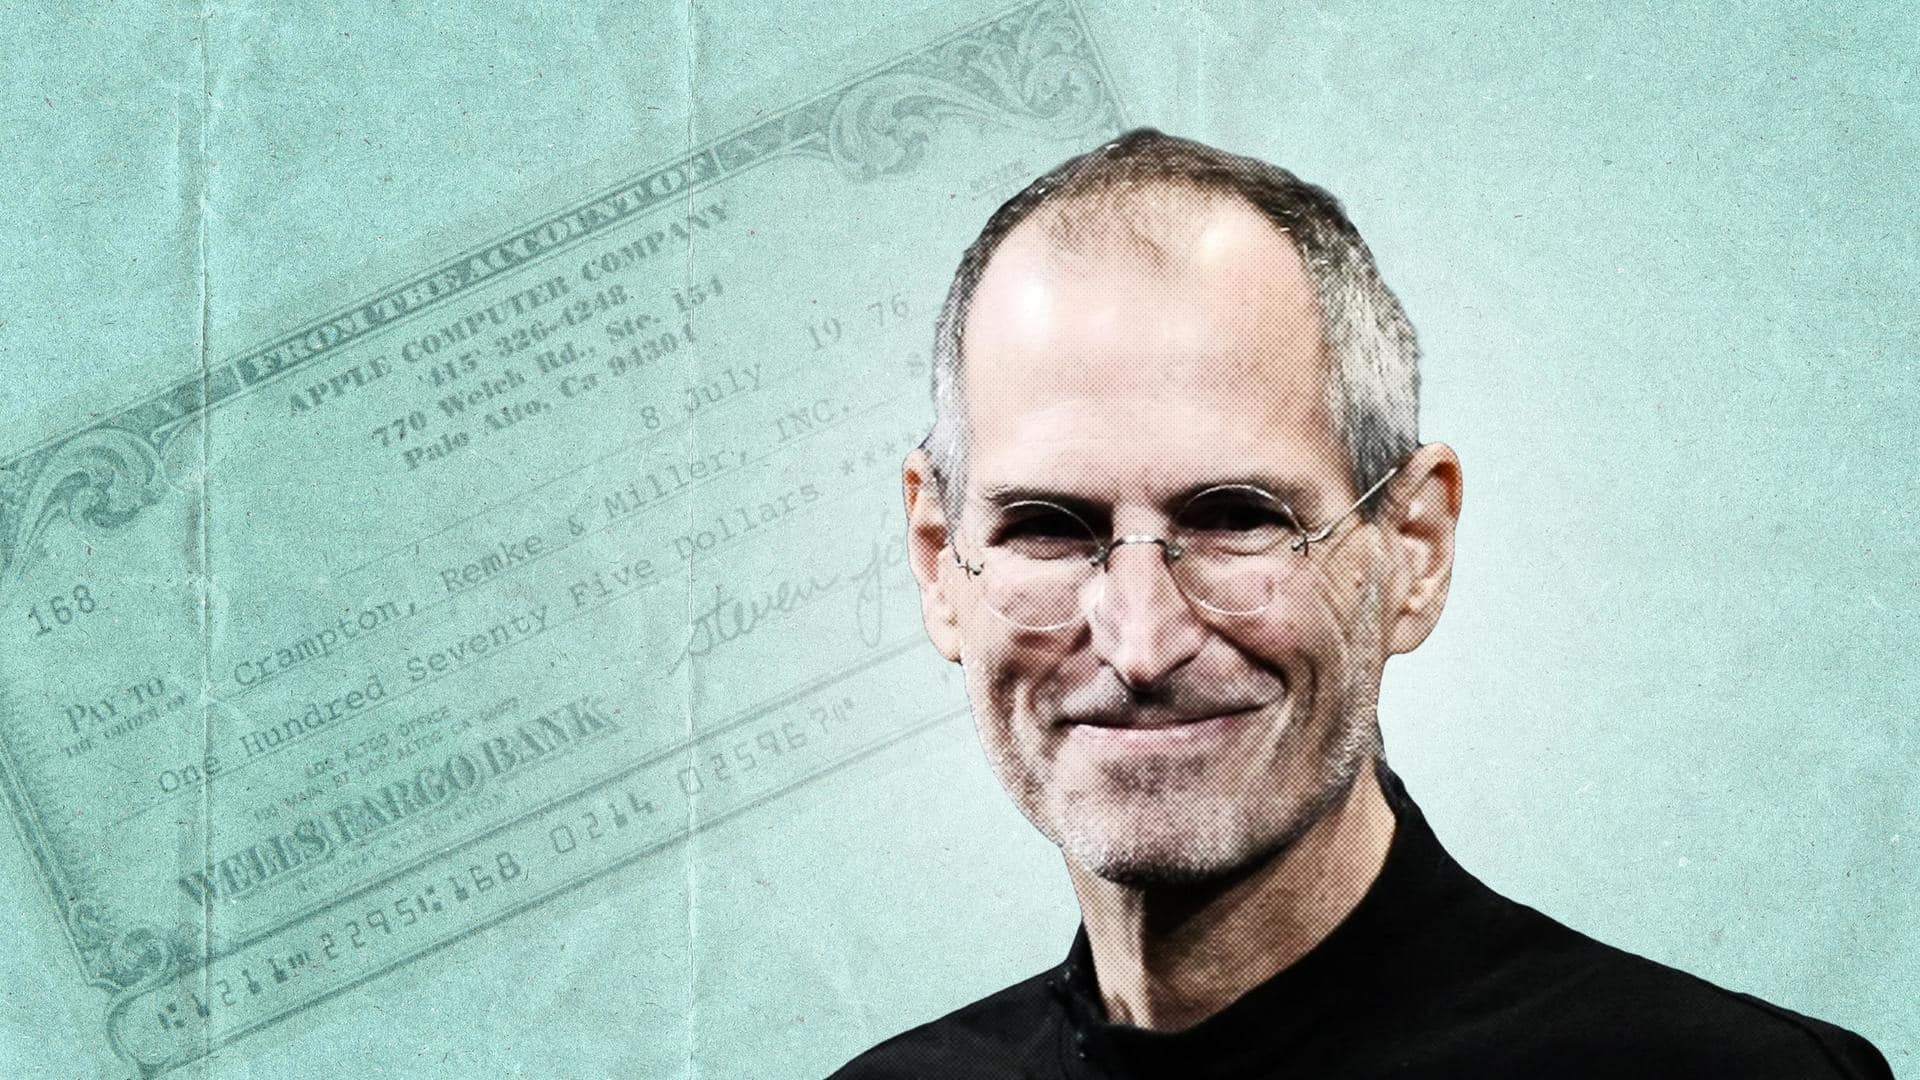 A $175 check signed by Steve Jobs sold at $100K